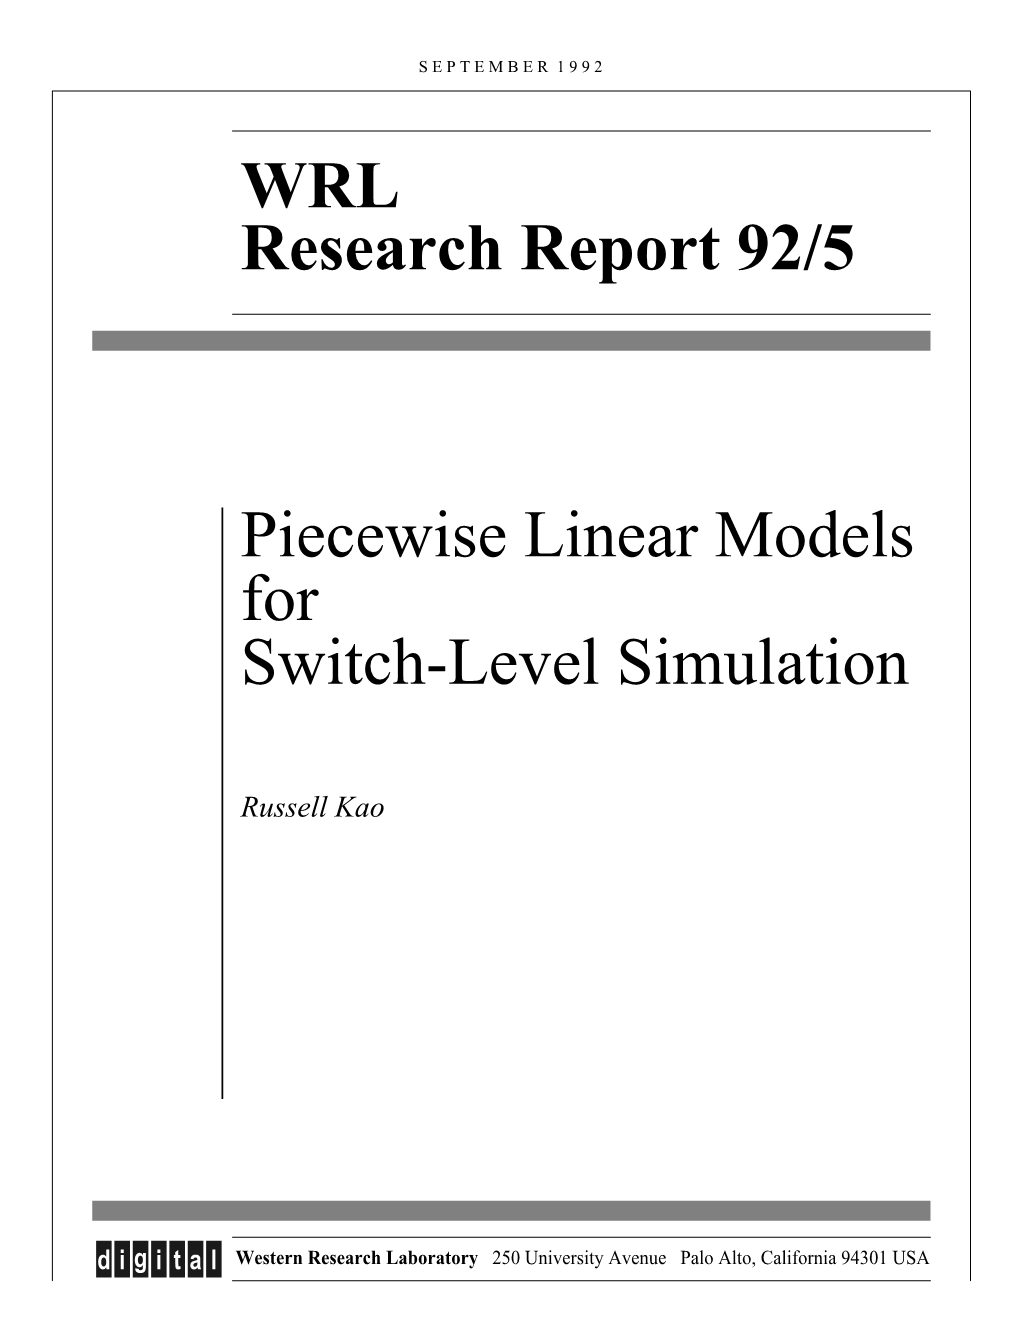 Piecewise Linear Models for Switch-Level Simulation